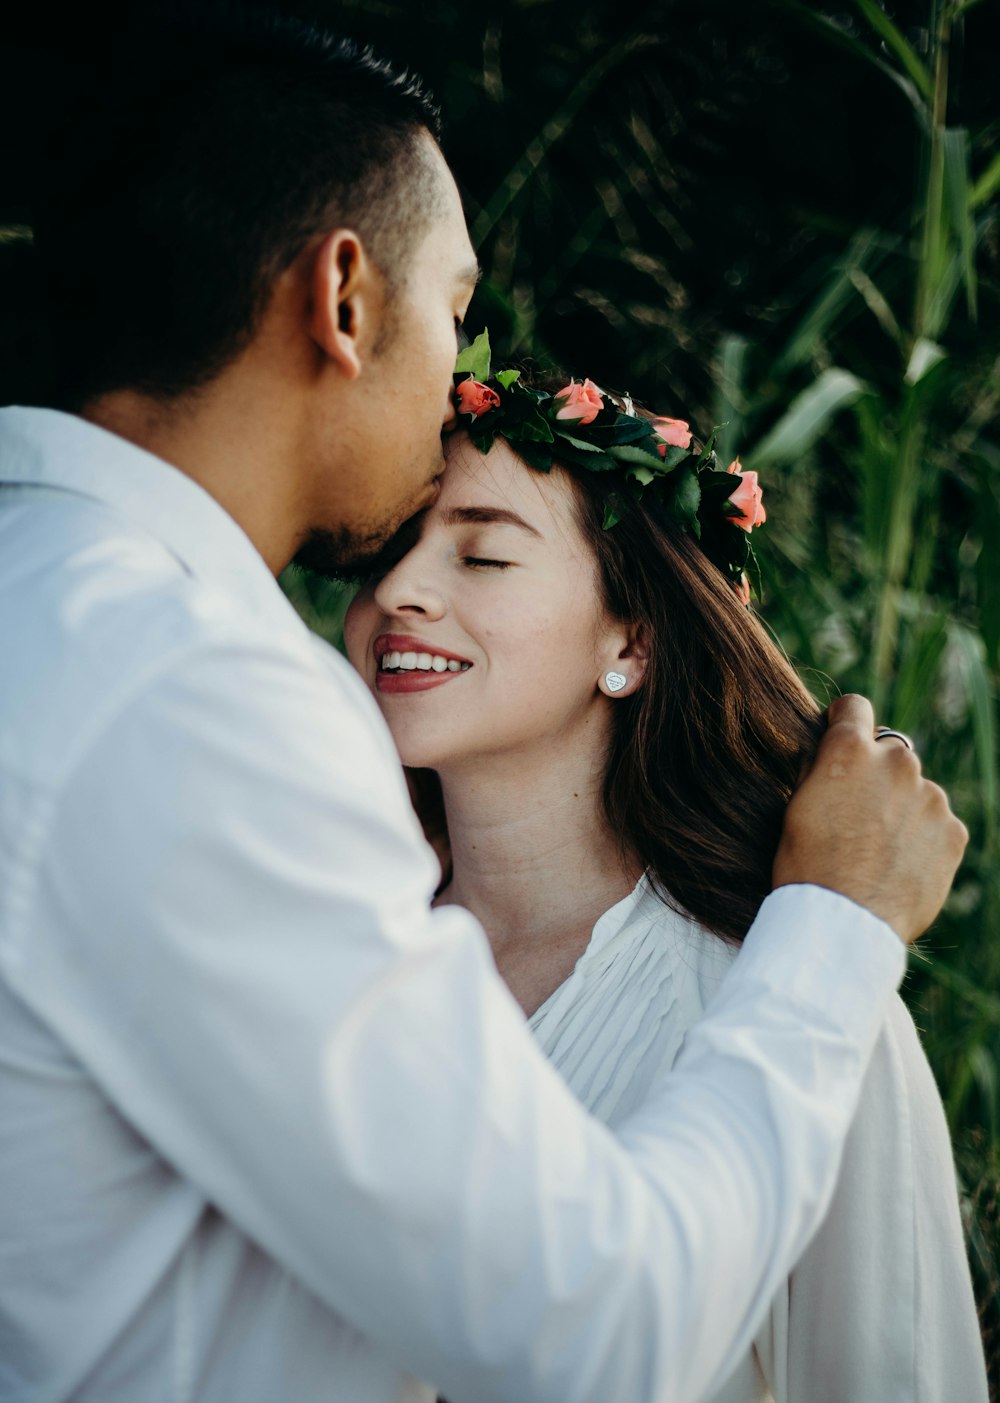 750+ Husband And Wife Pictures | Download Free Images on Unsplash